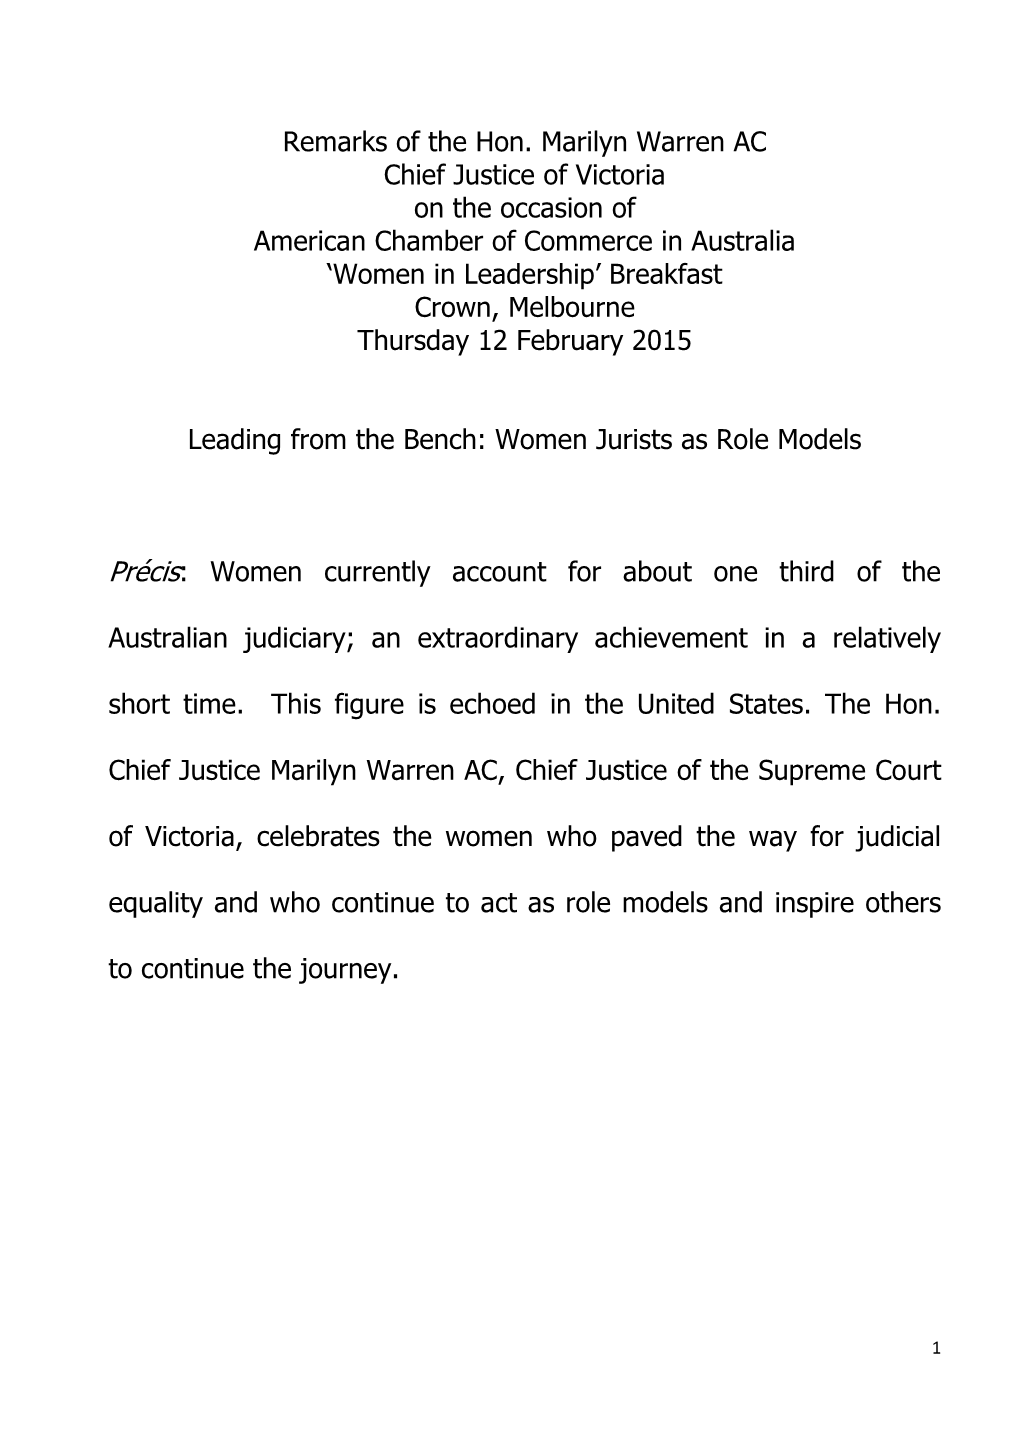 Remarks of the Hon. Marilyn Warren AC Chief Justice of Victoria on The